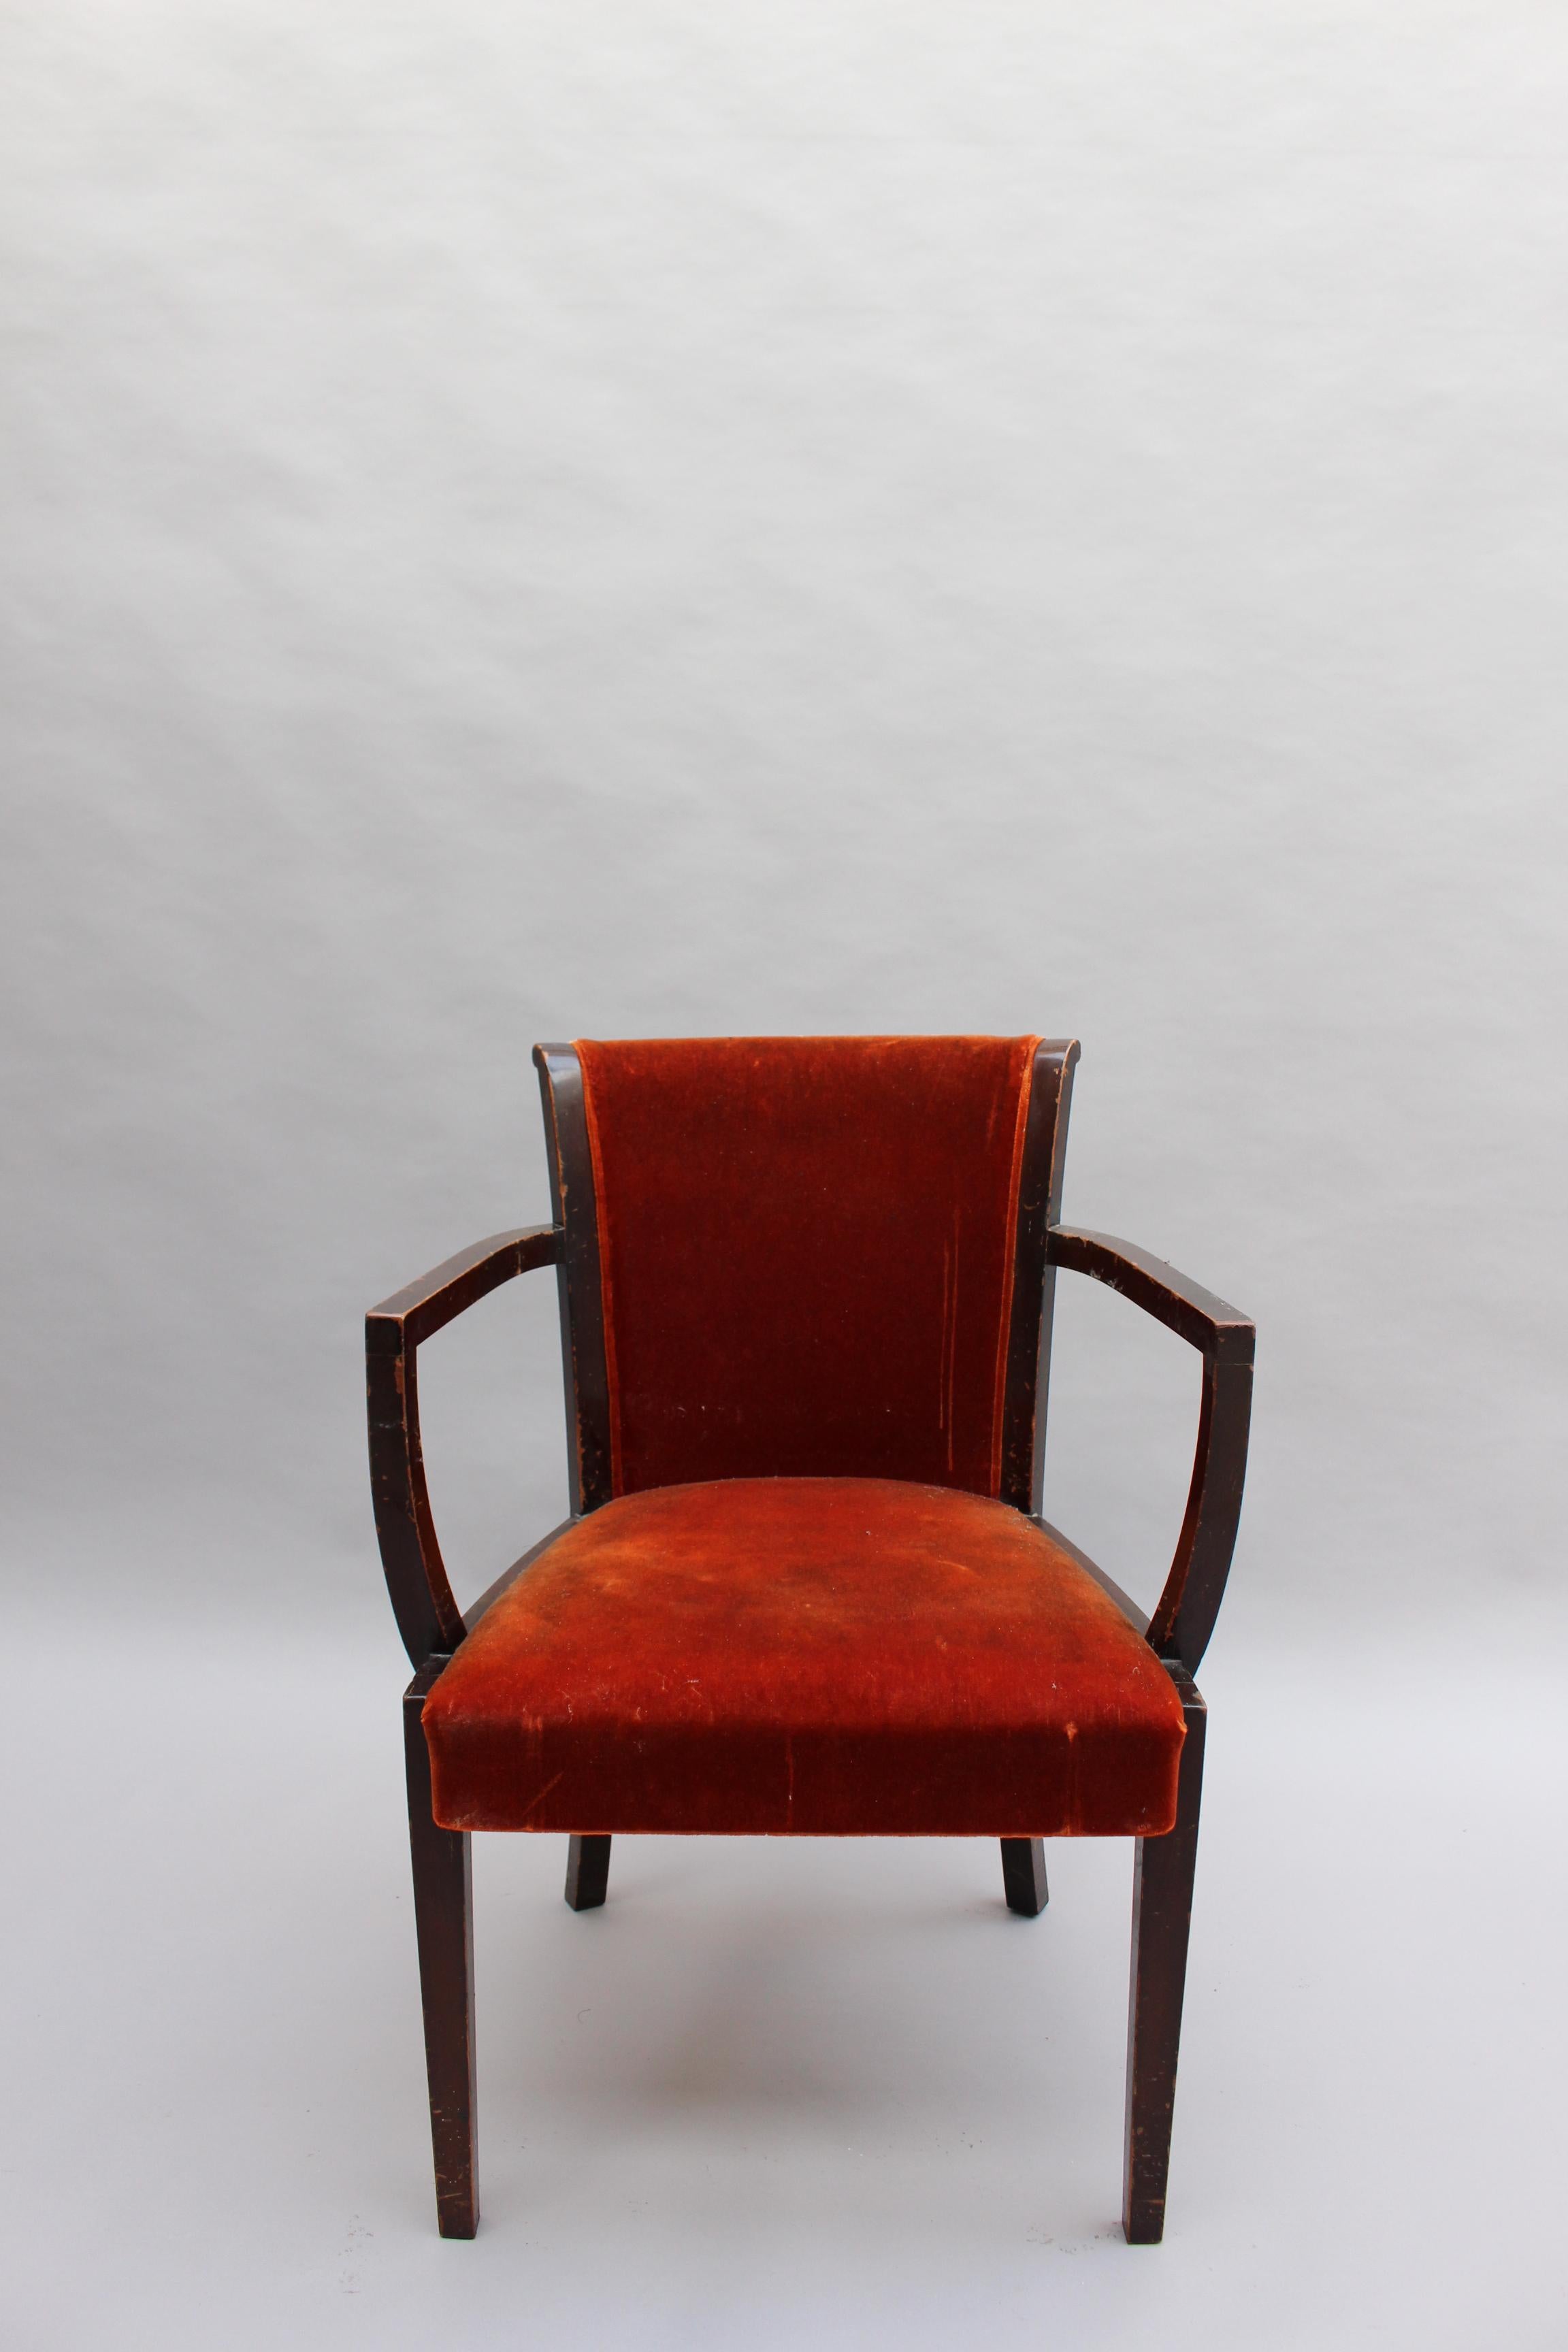 Mid-20th Century Set of 6 Fine Belgium Art Deco Chairs by De Coene (4 Side and 2 Arm) For Sale